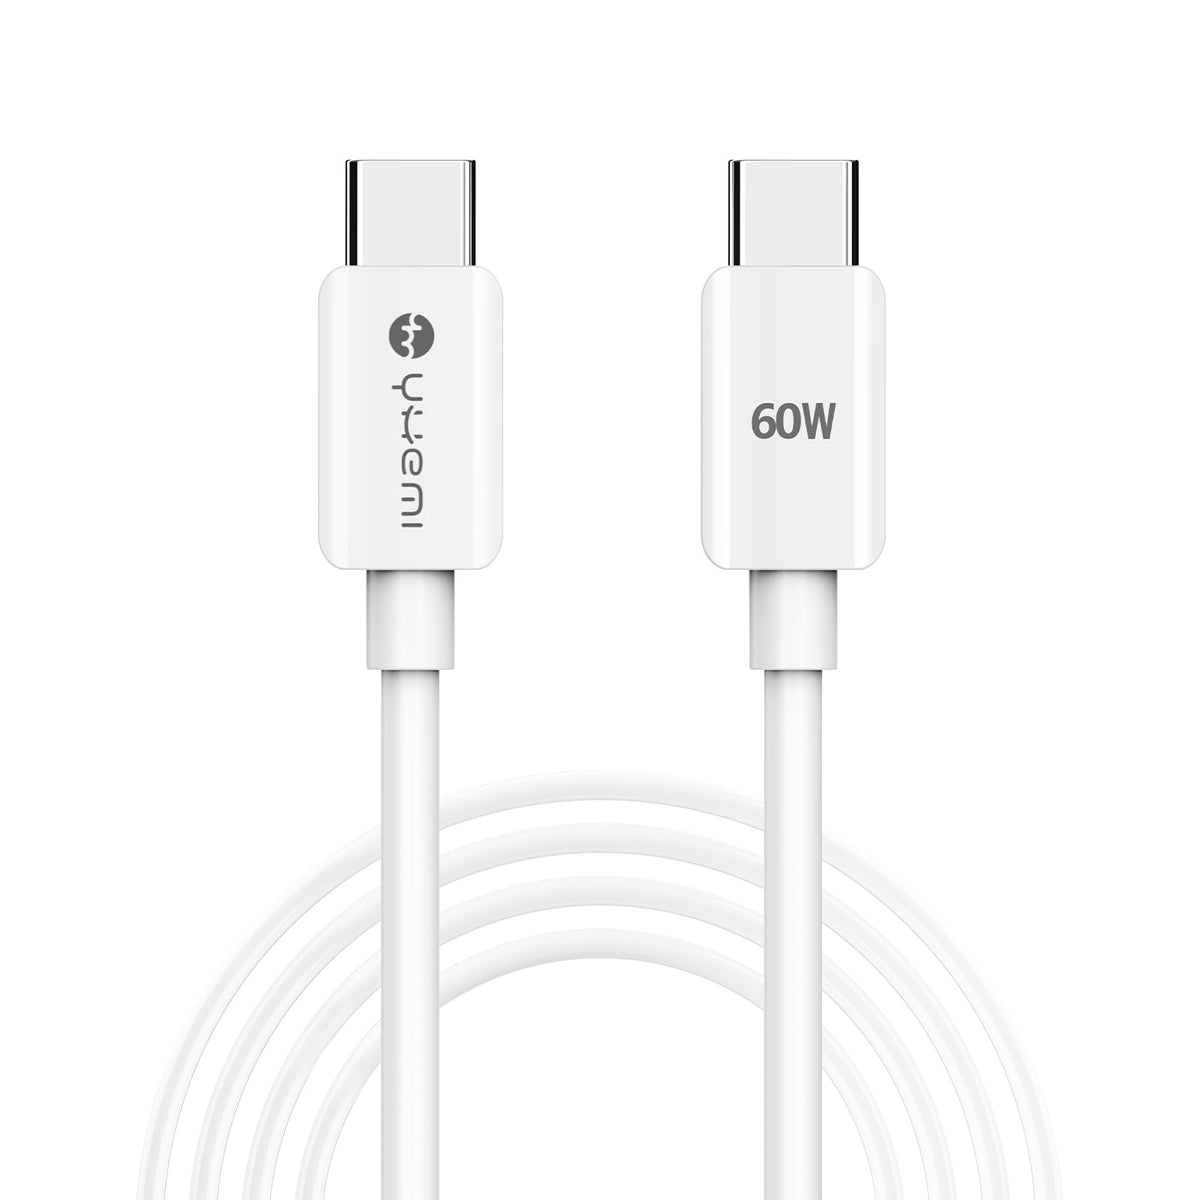 USB C to USB C Cable, TOTU 60W Type C to Type C Fast Charging Cable Compatible with MacBook Air/Pro, iPad Pro 12.9/11/Air/Mini, Samsung Galaxy S22/21/ 20/Note20 - TOTU